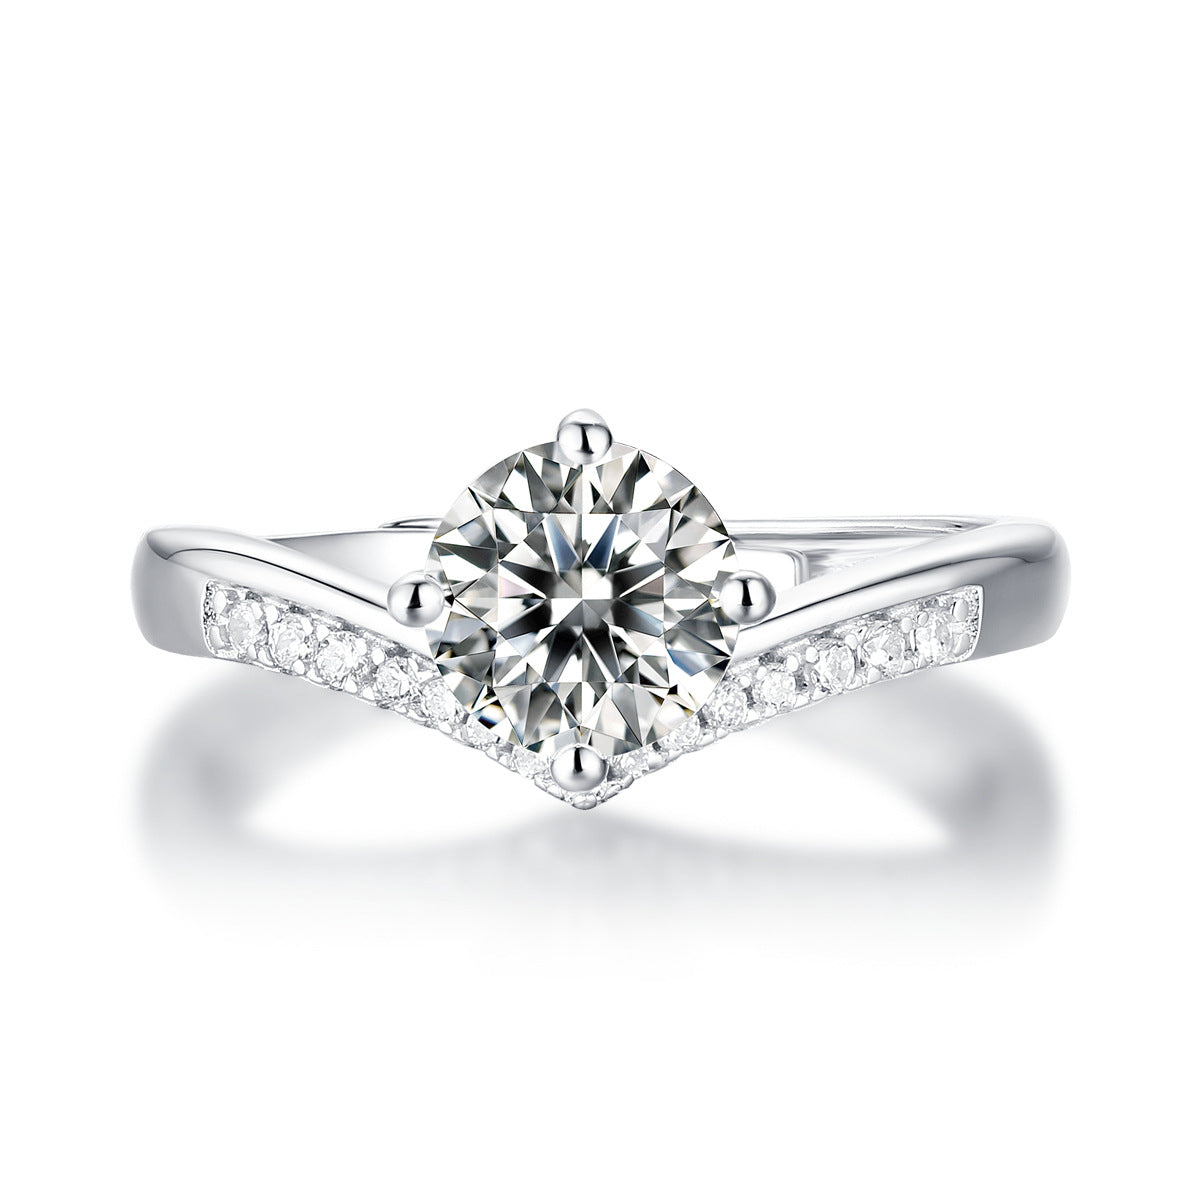 VogueFlo 925 Sterling Silver Princess Crown Ring adorned with a 1 Carat Moissanite